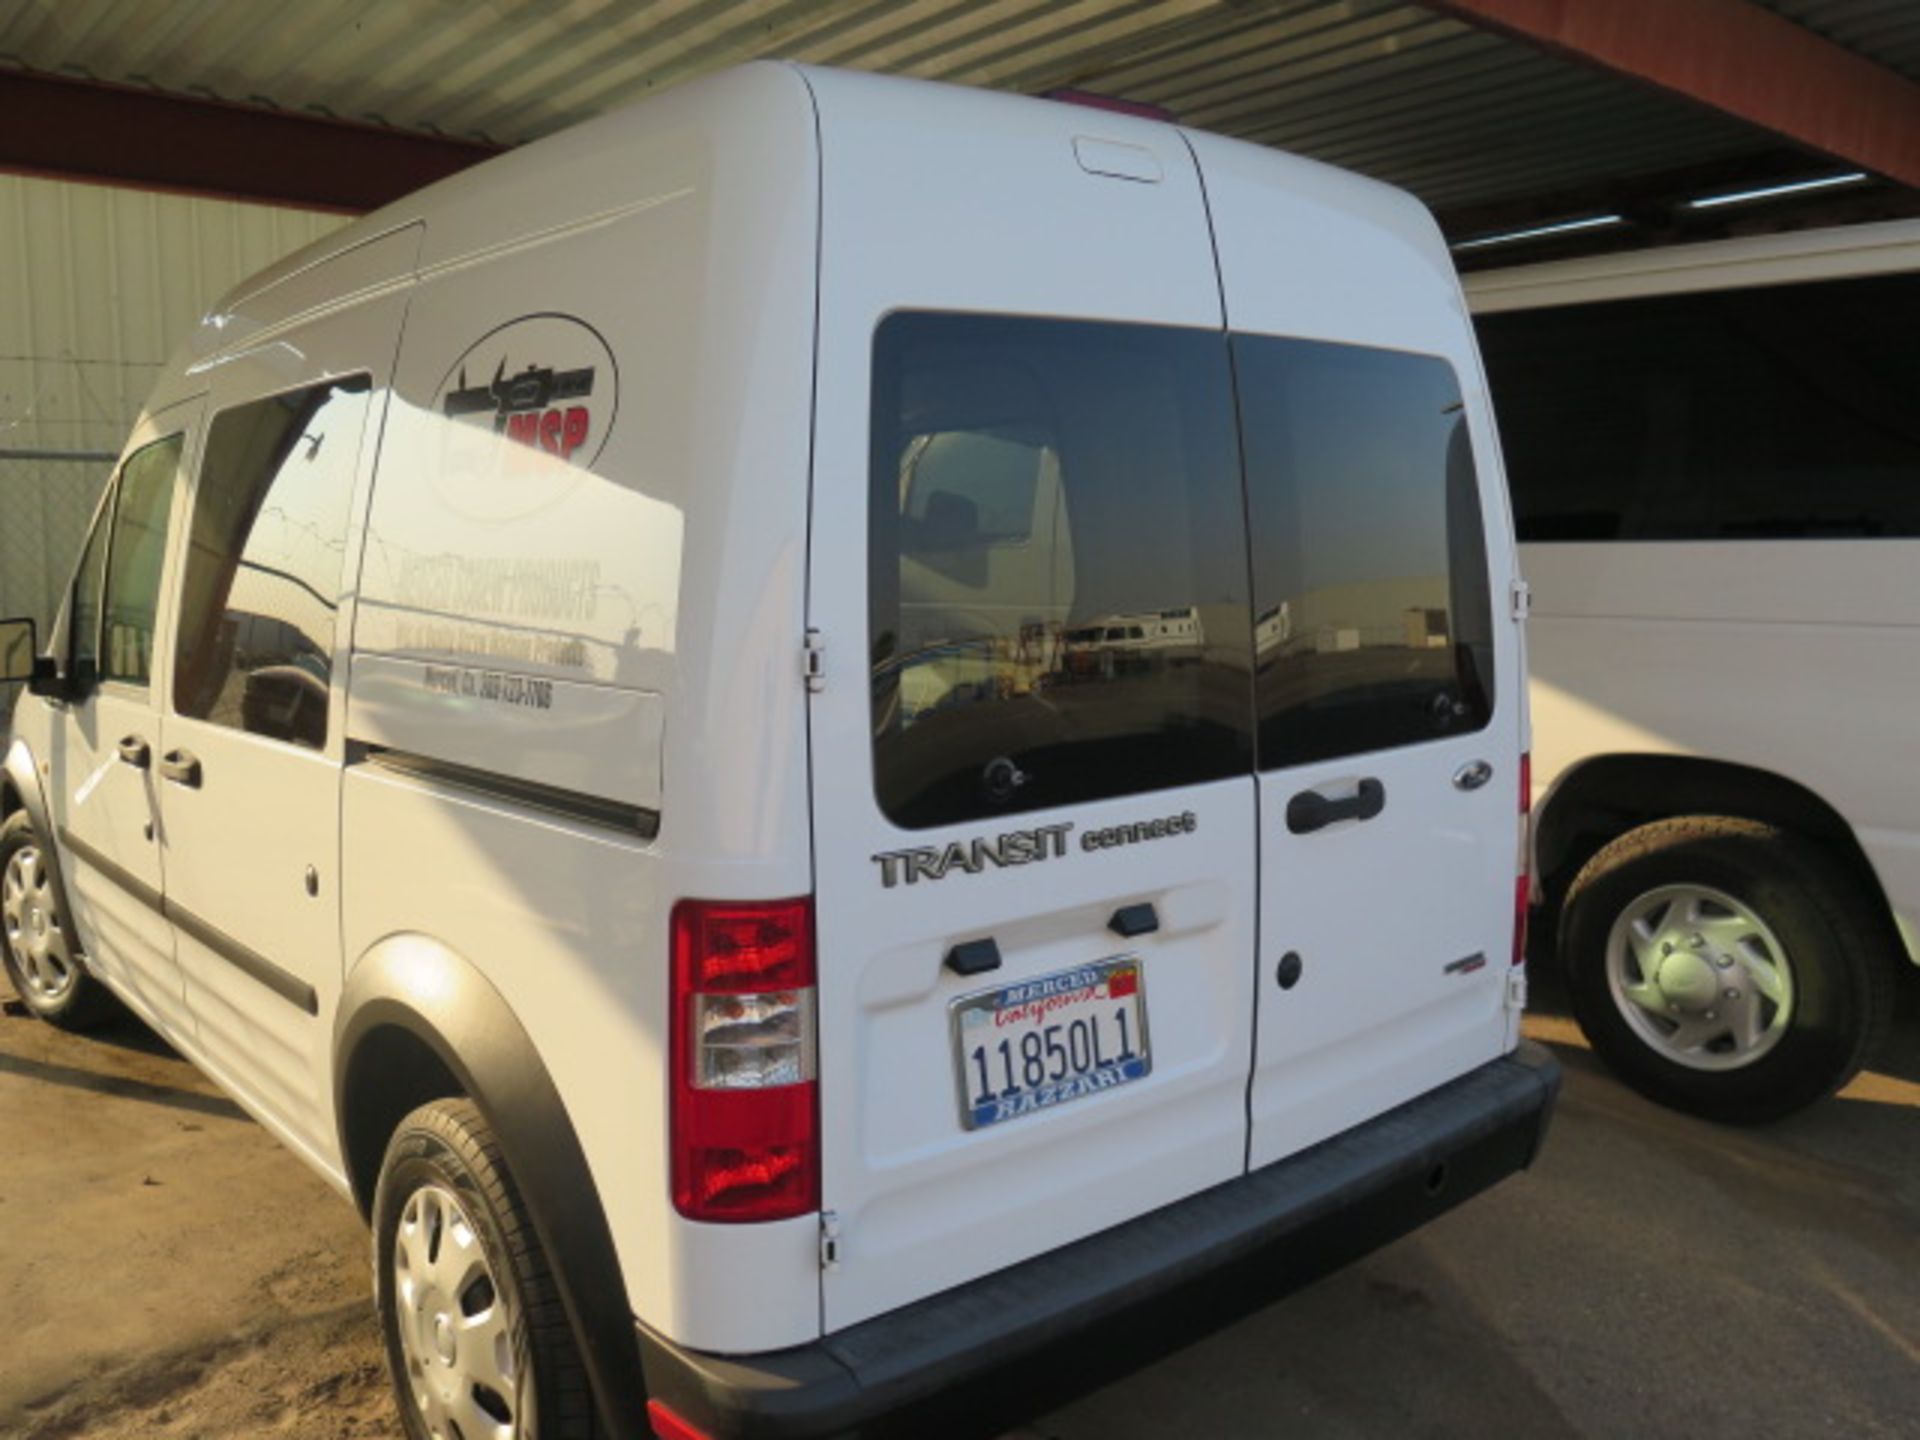 2013 Ford Transit Connect Van Lisc# 11850L1, Gas Engine, Auto Trans, AC, 249,936 Miles, SOLD AS IS - Image 4 of 19